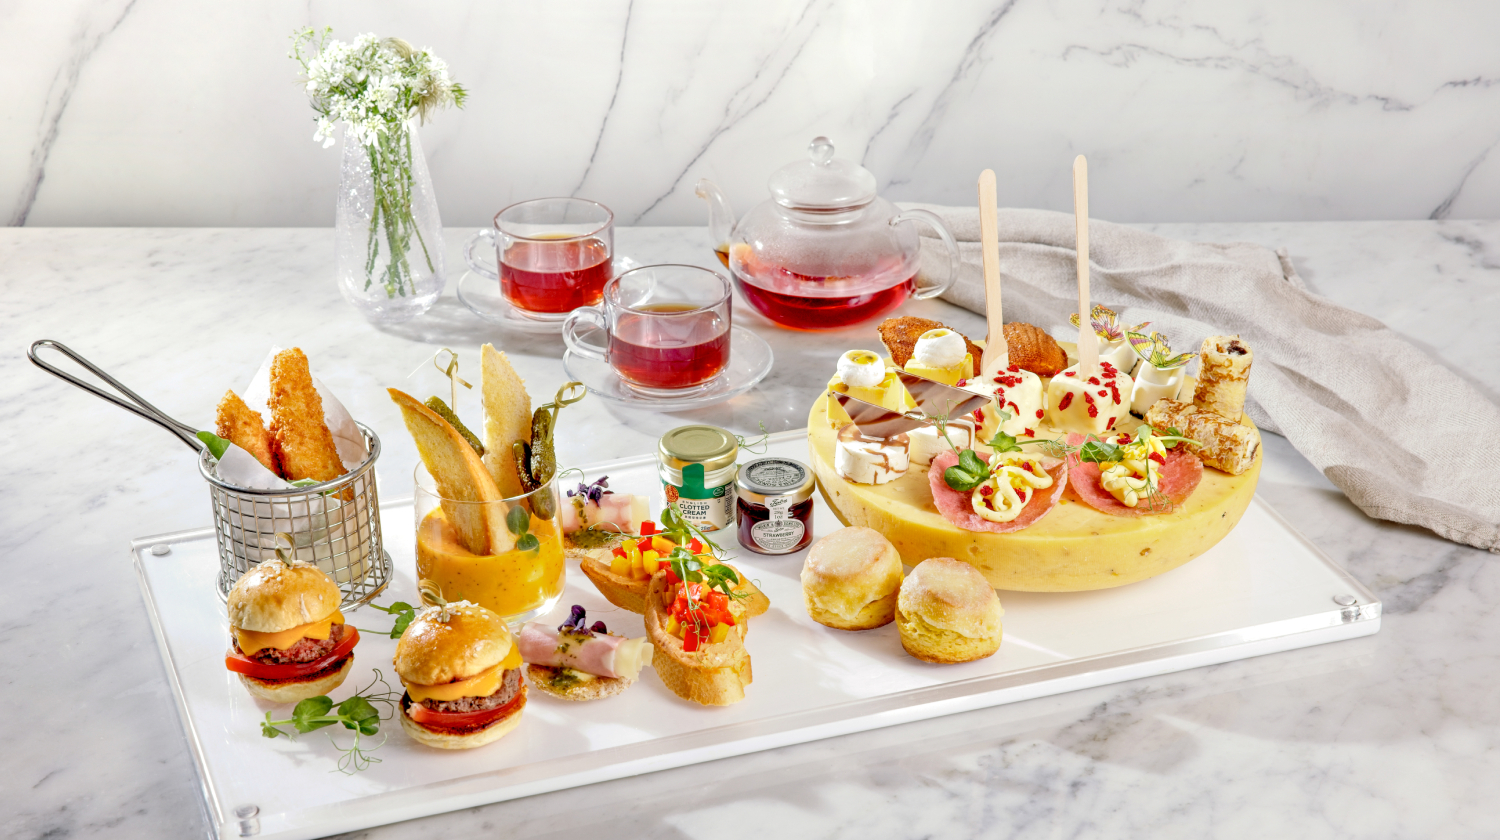 Cheese-licious Afternoon Tea Bliss